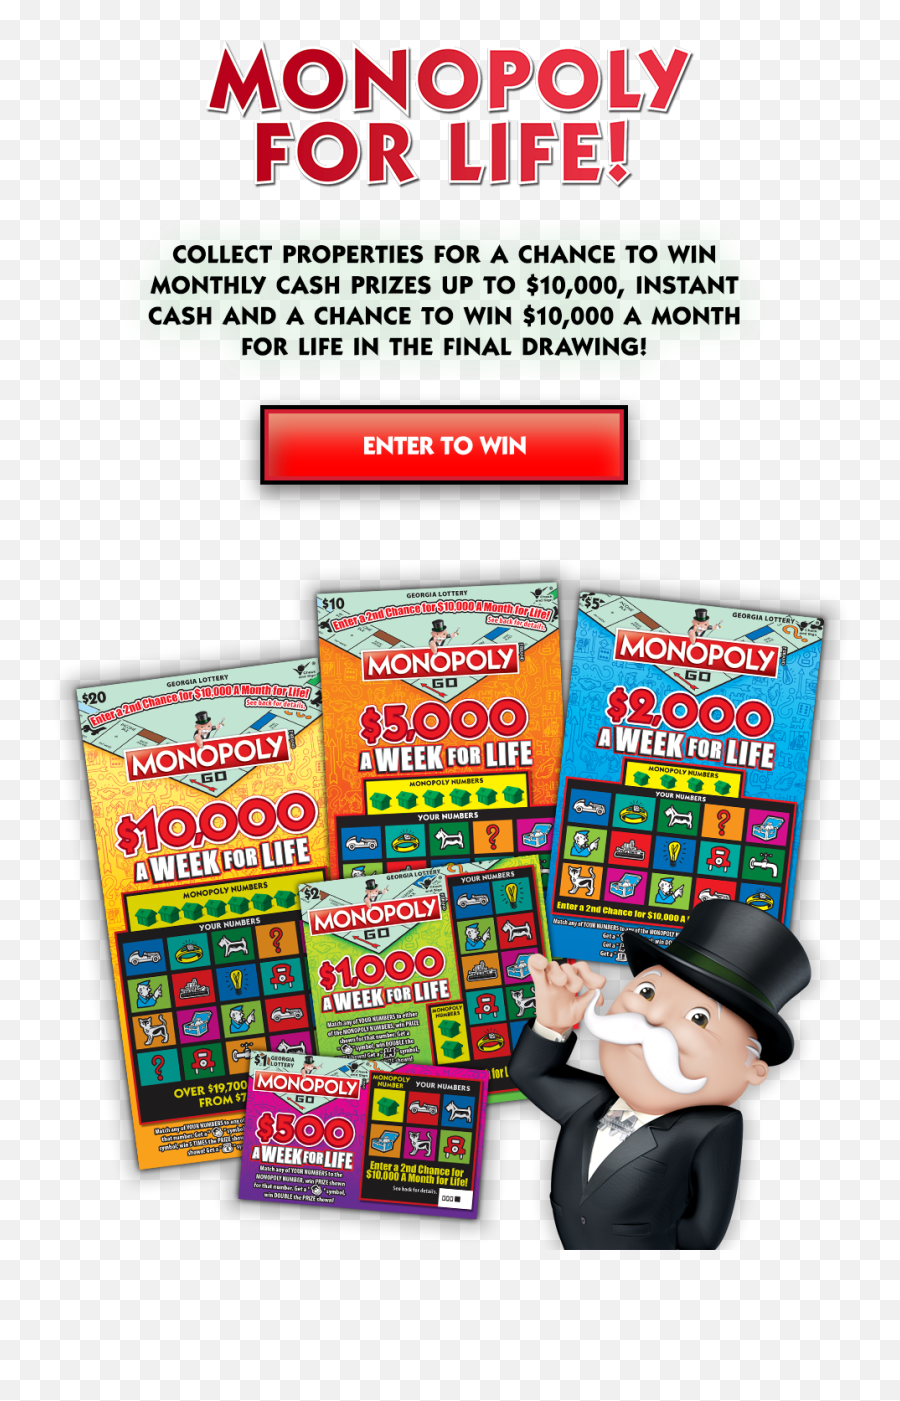 Home - Monopoly For Life Second Chance Promotion Suit Separate Emoji,Monopoly Png